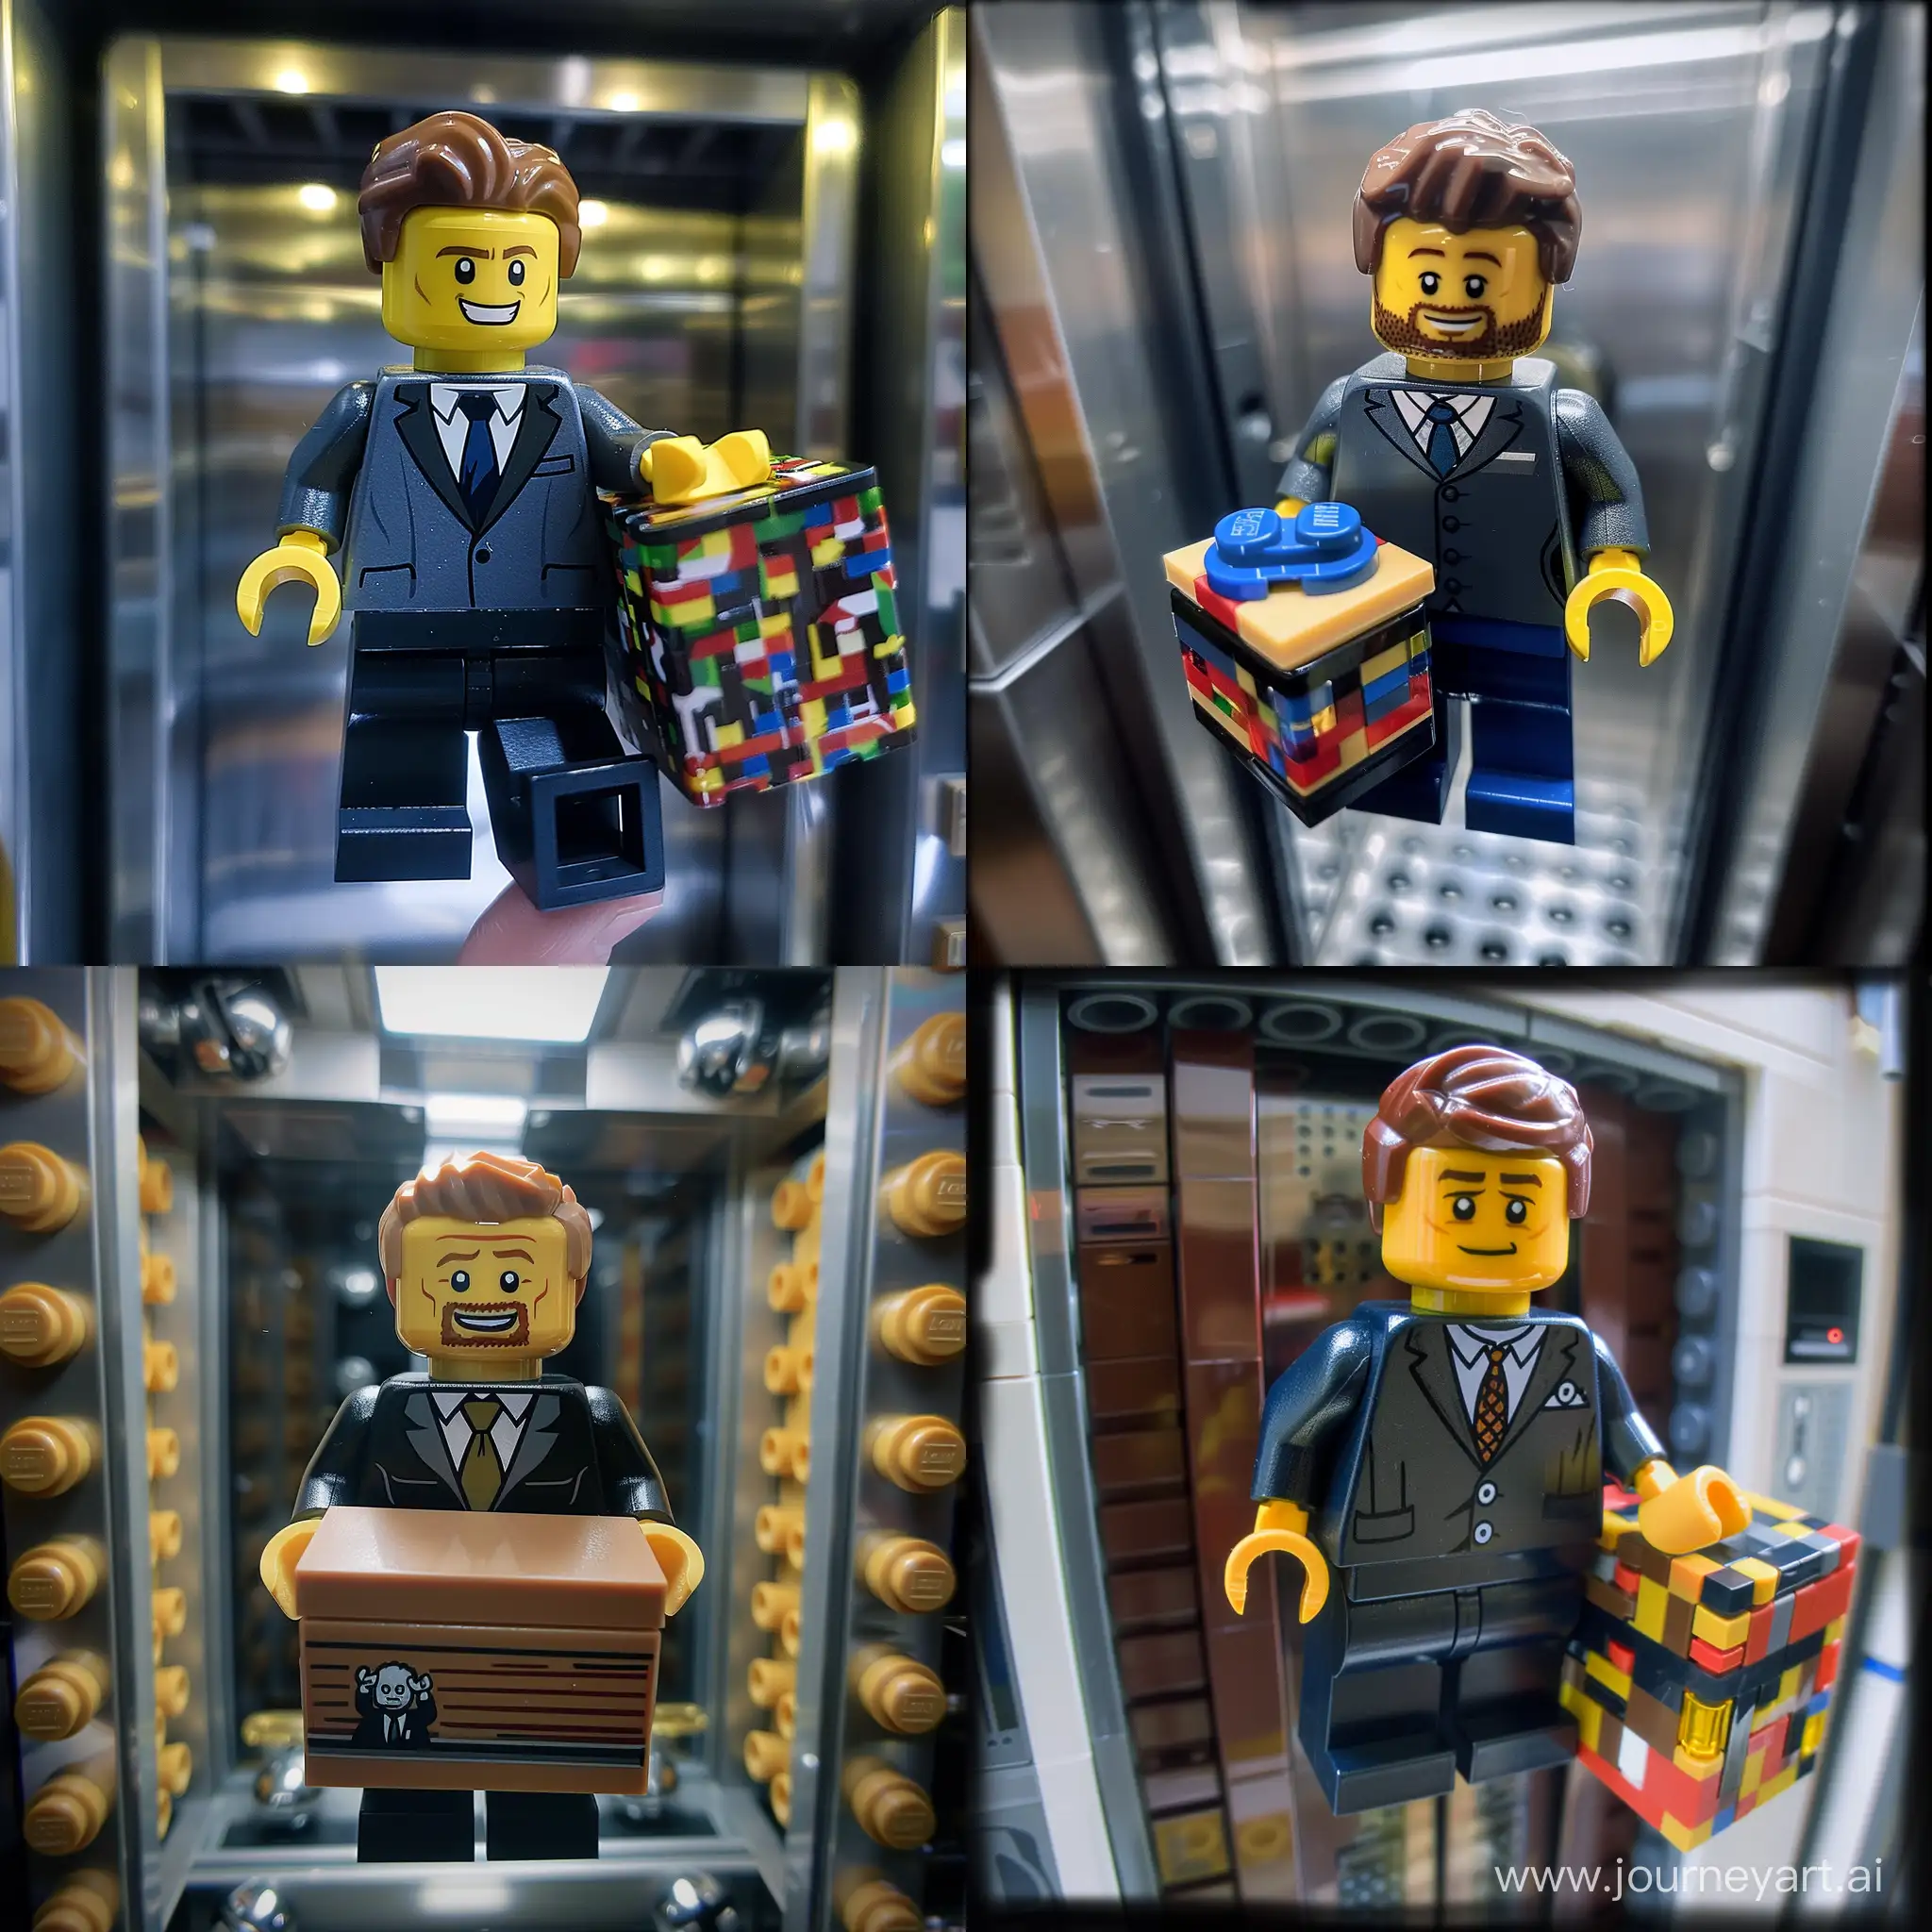 Elevator-Business-Lego-Man-in-Suit-with-Bear-and-Lego-Box